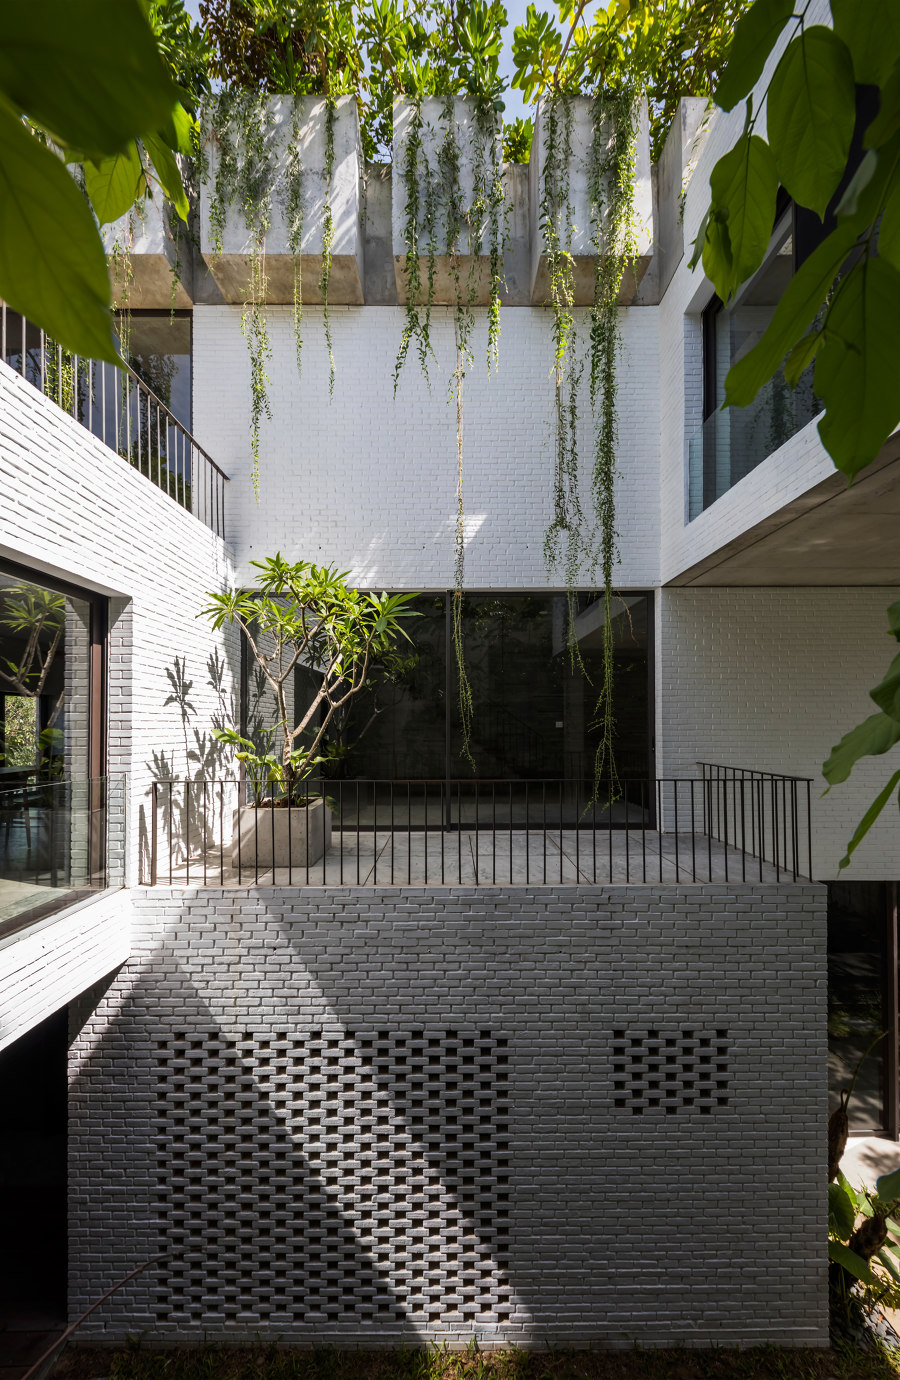 Thang House von Vo Trong Nghia Architects | Einfamilienhäuser